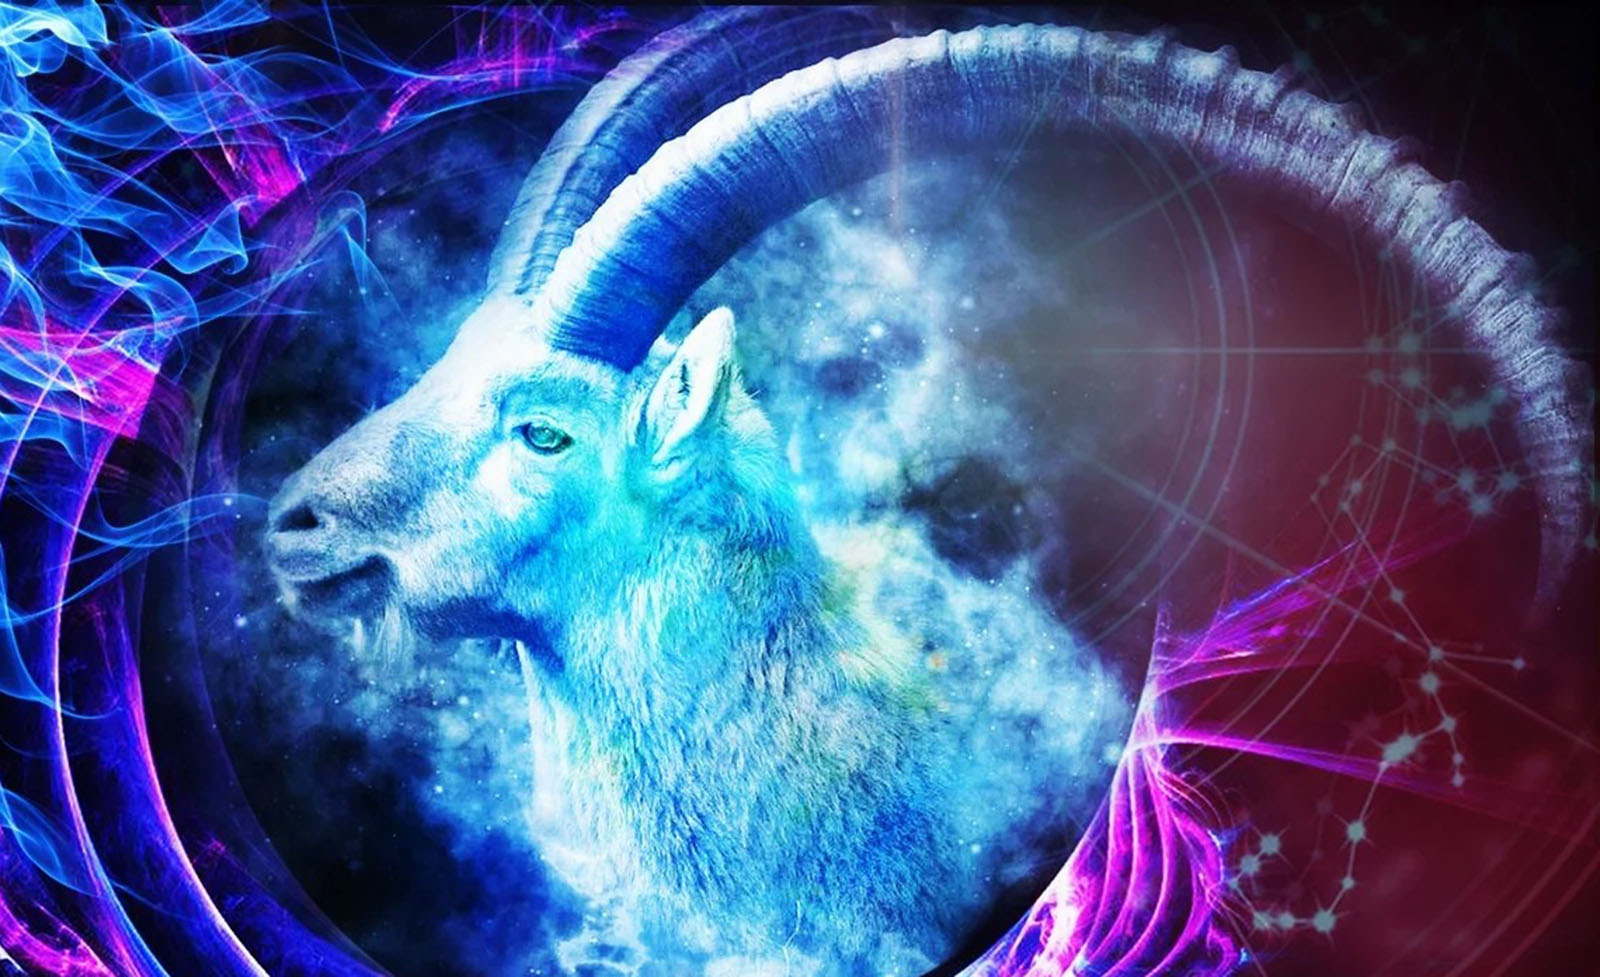 Feng Shui Astrology For July 2021: The Month of the Wood Goat - SOLANCHA